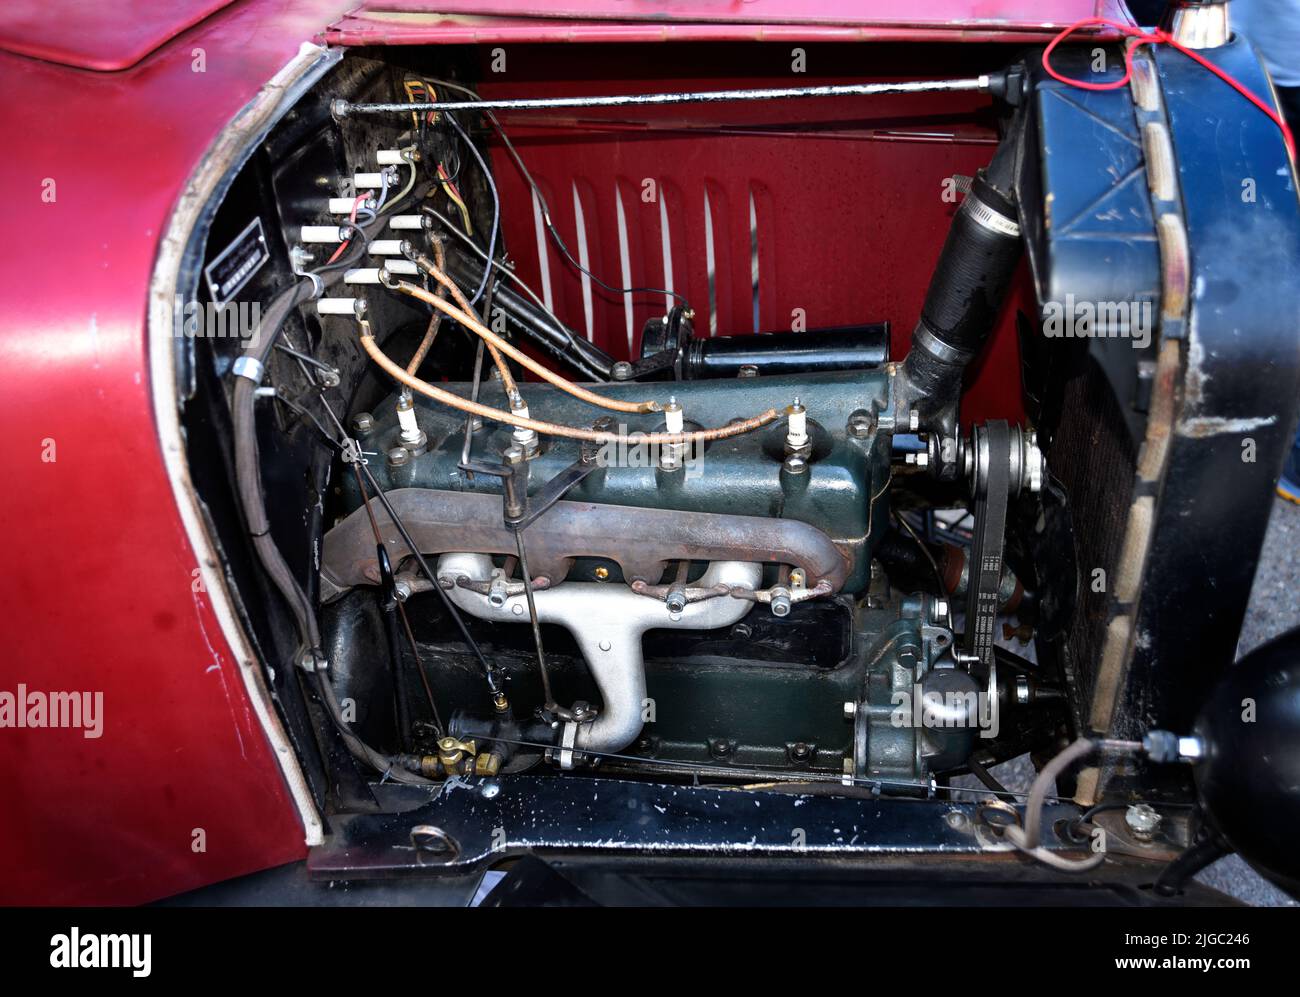 The engine of a 1924 Ford Model T on display at a Fourth of July car show in Santa Fe, New Mexico. Stock Photo